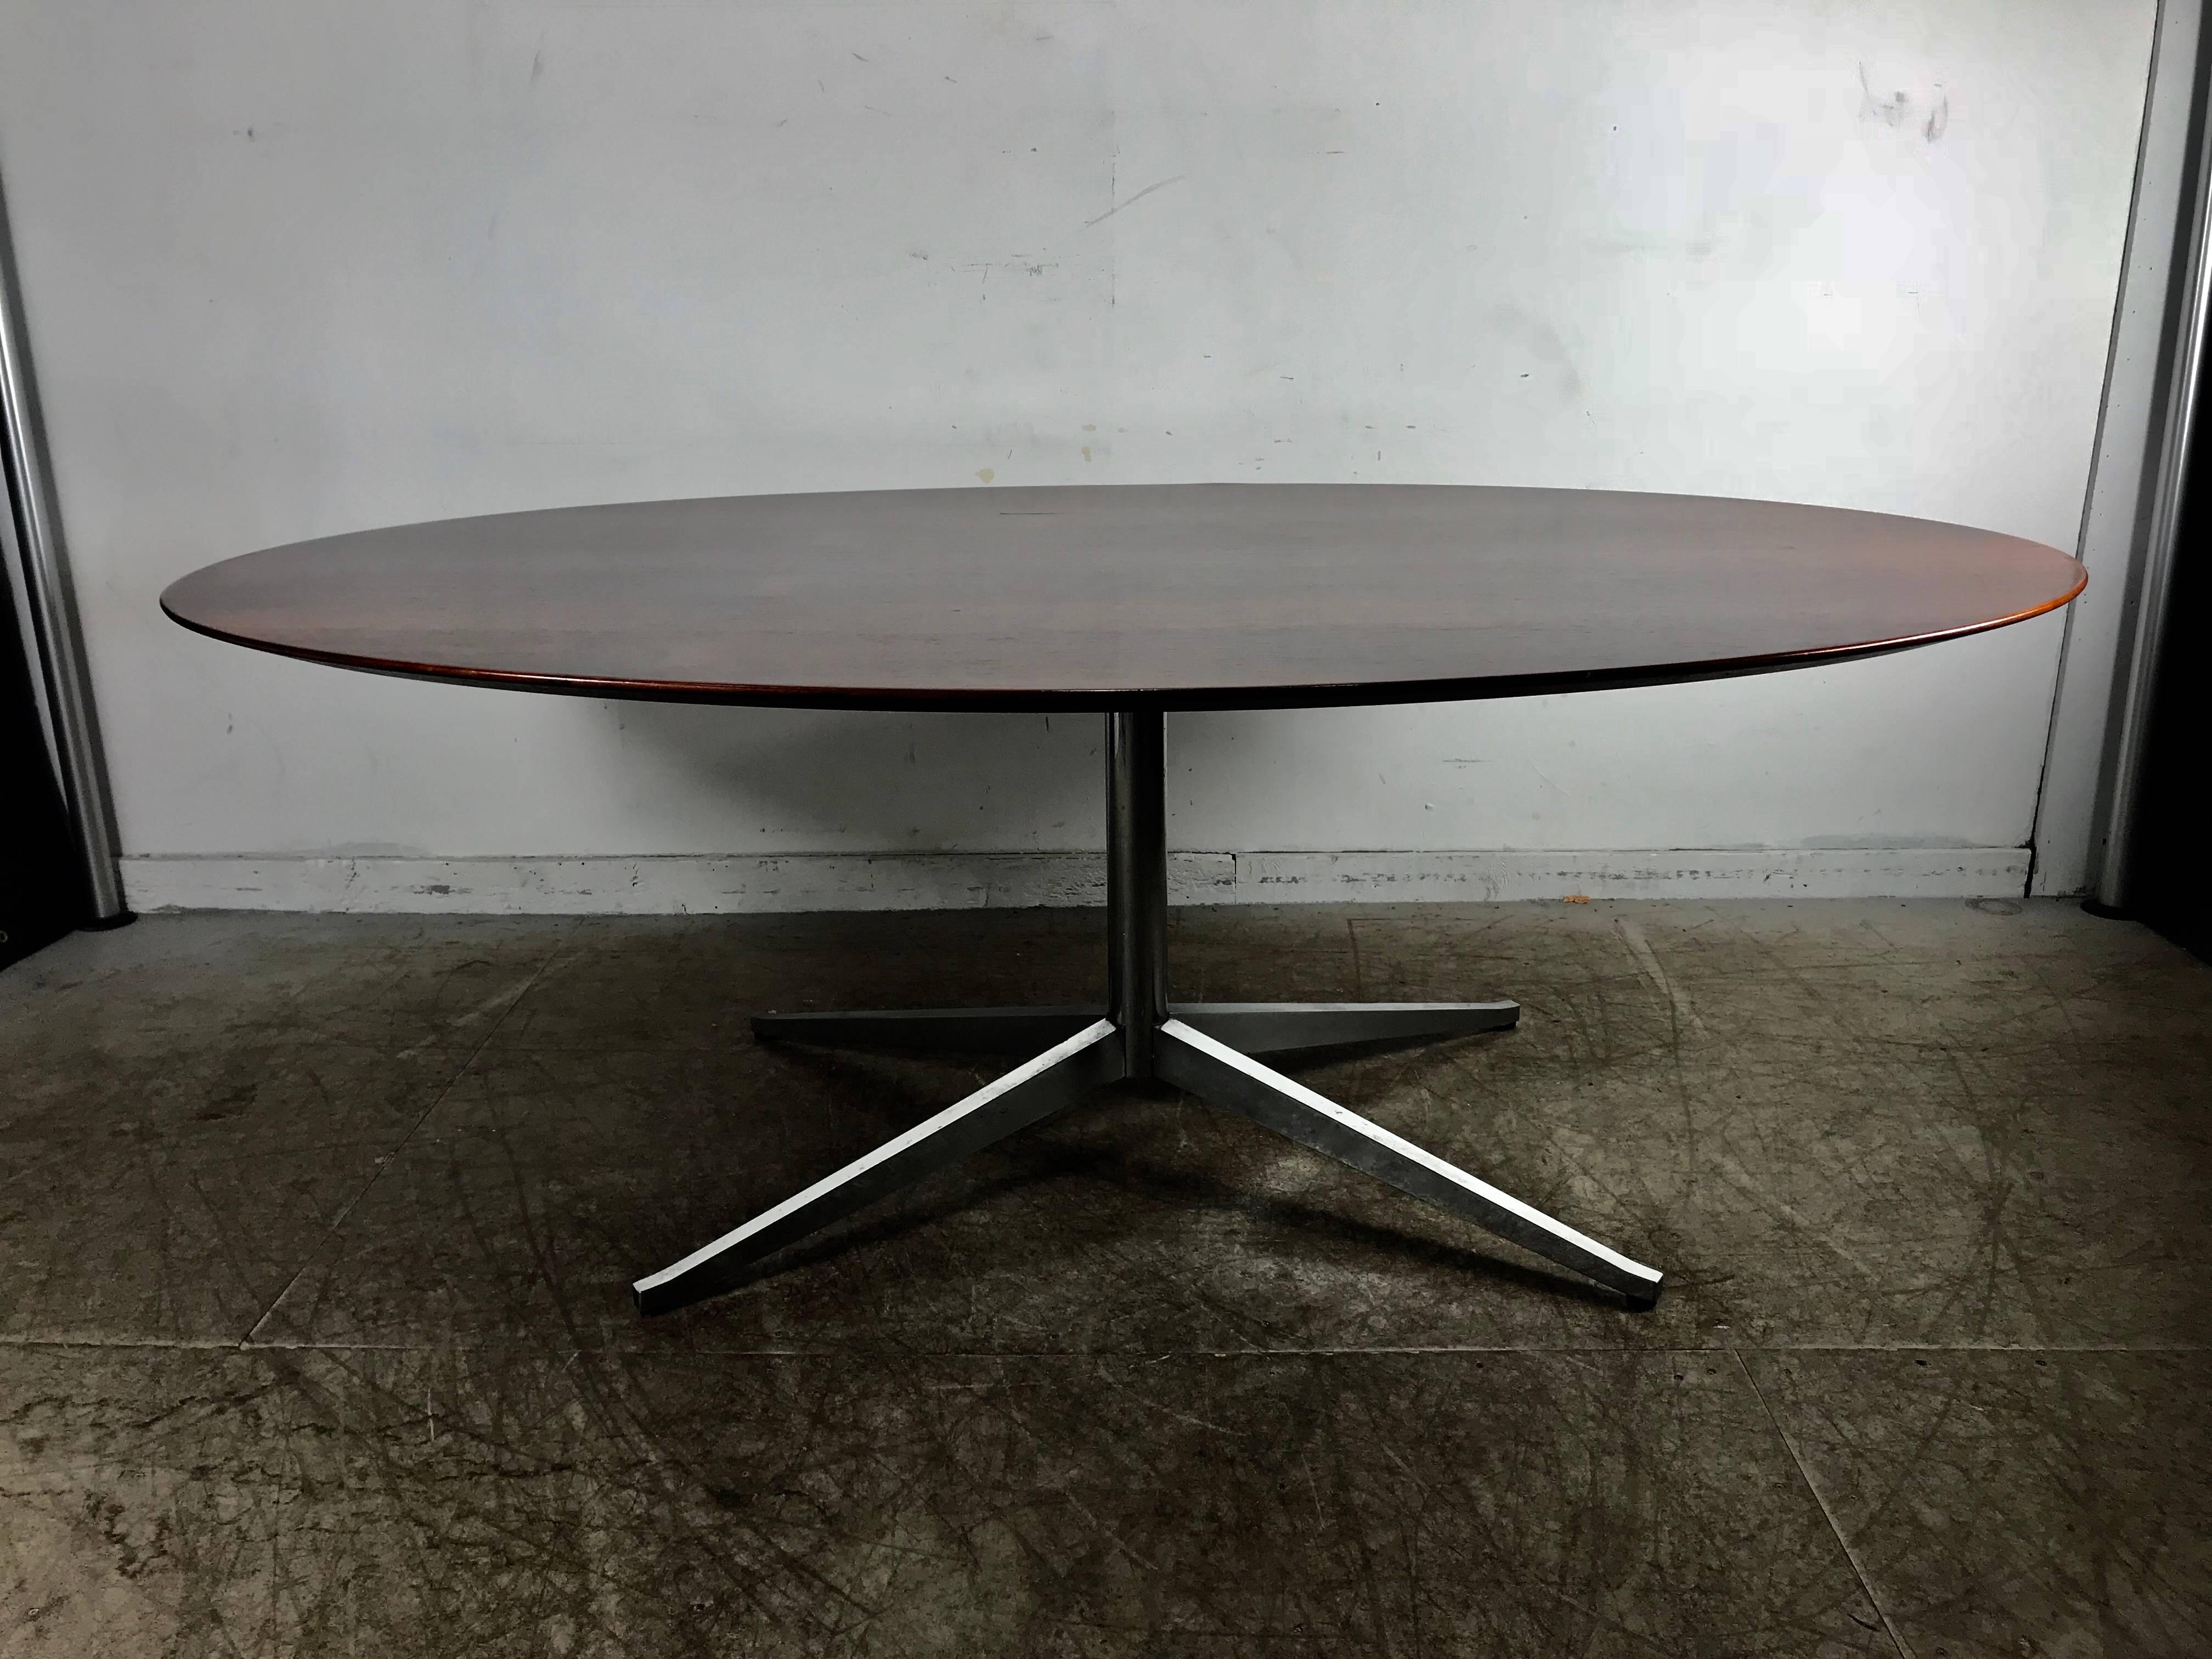 Florence Knoll conference or dining table, rosewood top for Knoll. Stunning example of a Classic Mid-Century Modern design, richly grained bookmatched rosewood.